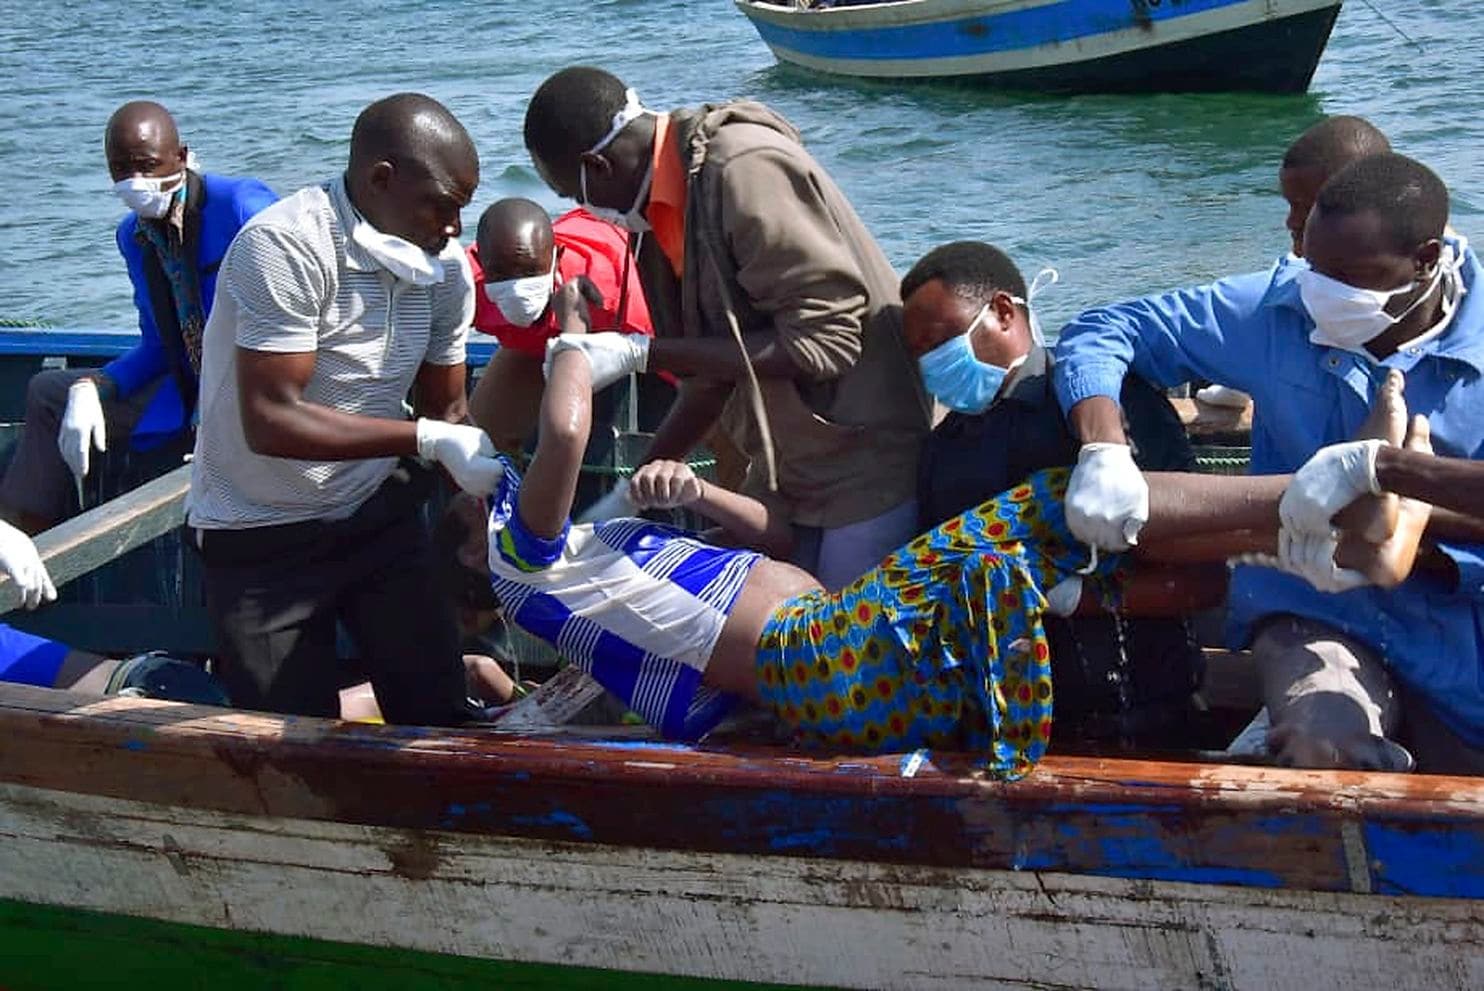 Rescuers retrieve a body from the water near Ukara Island in Lake Victoria, Tanzania yesterday. The death toll rose above 100. Net photo.